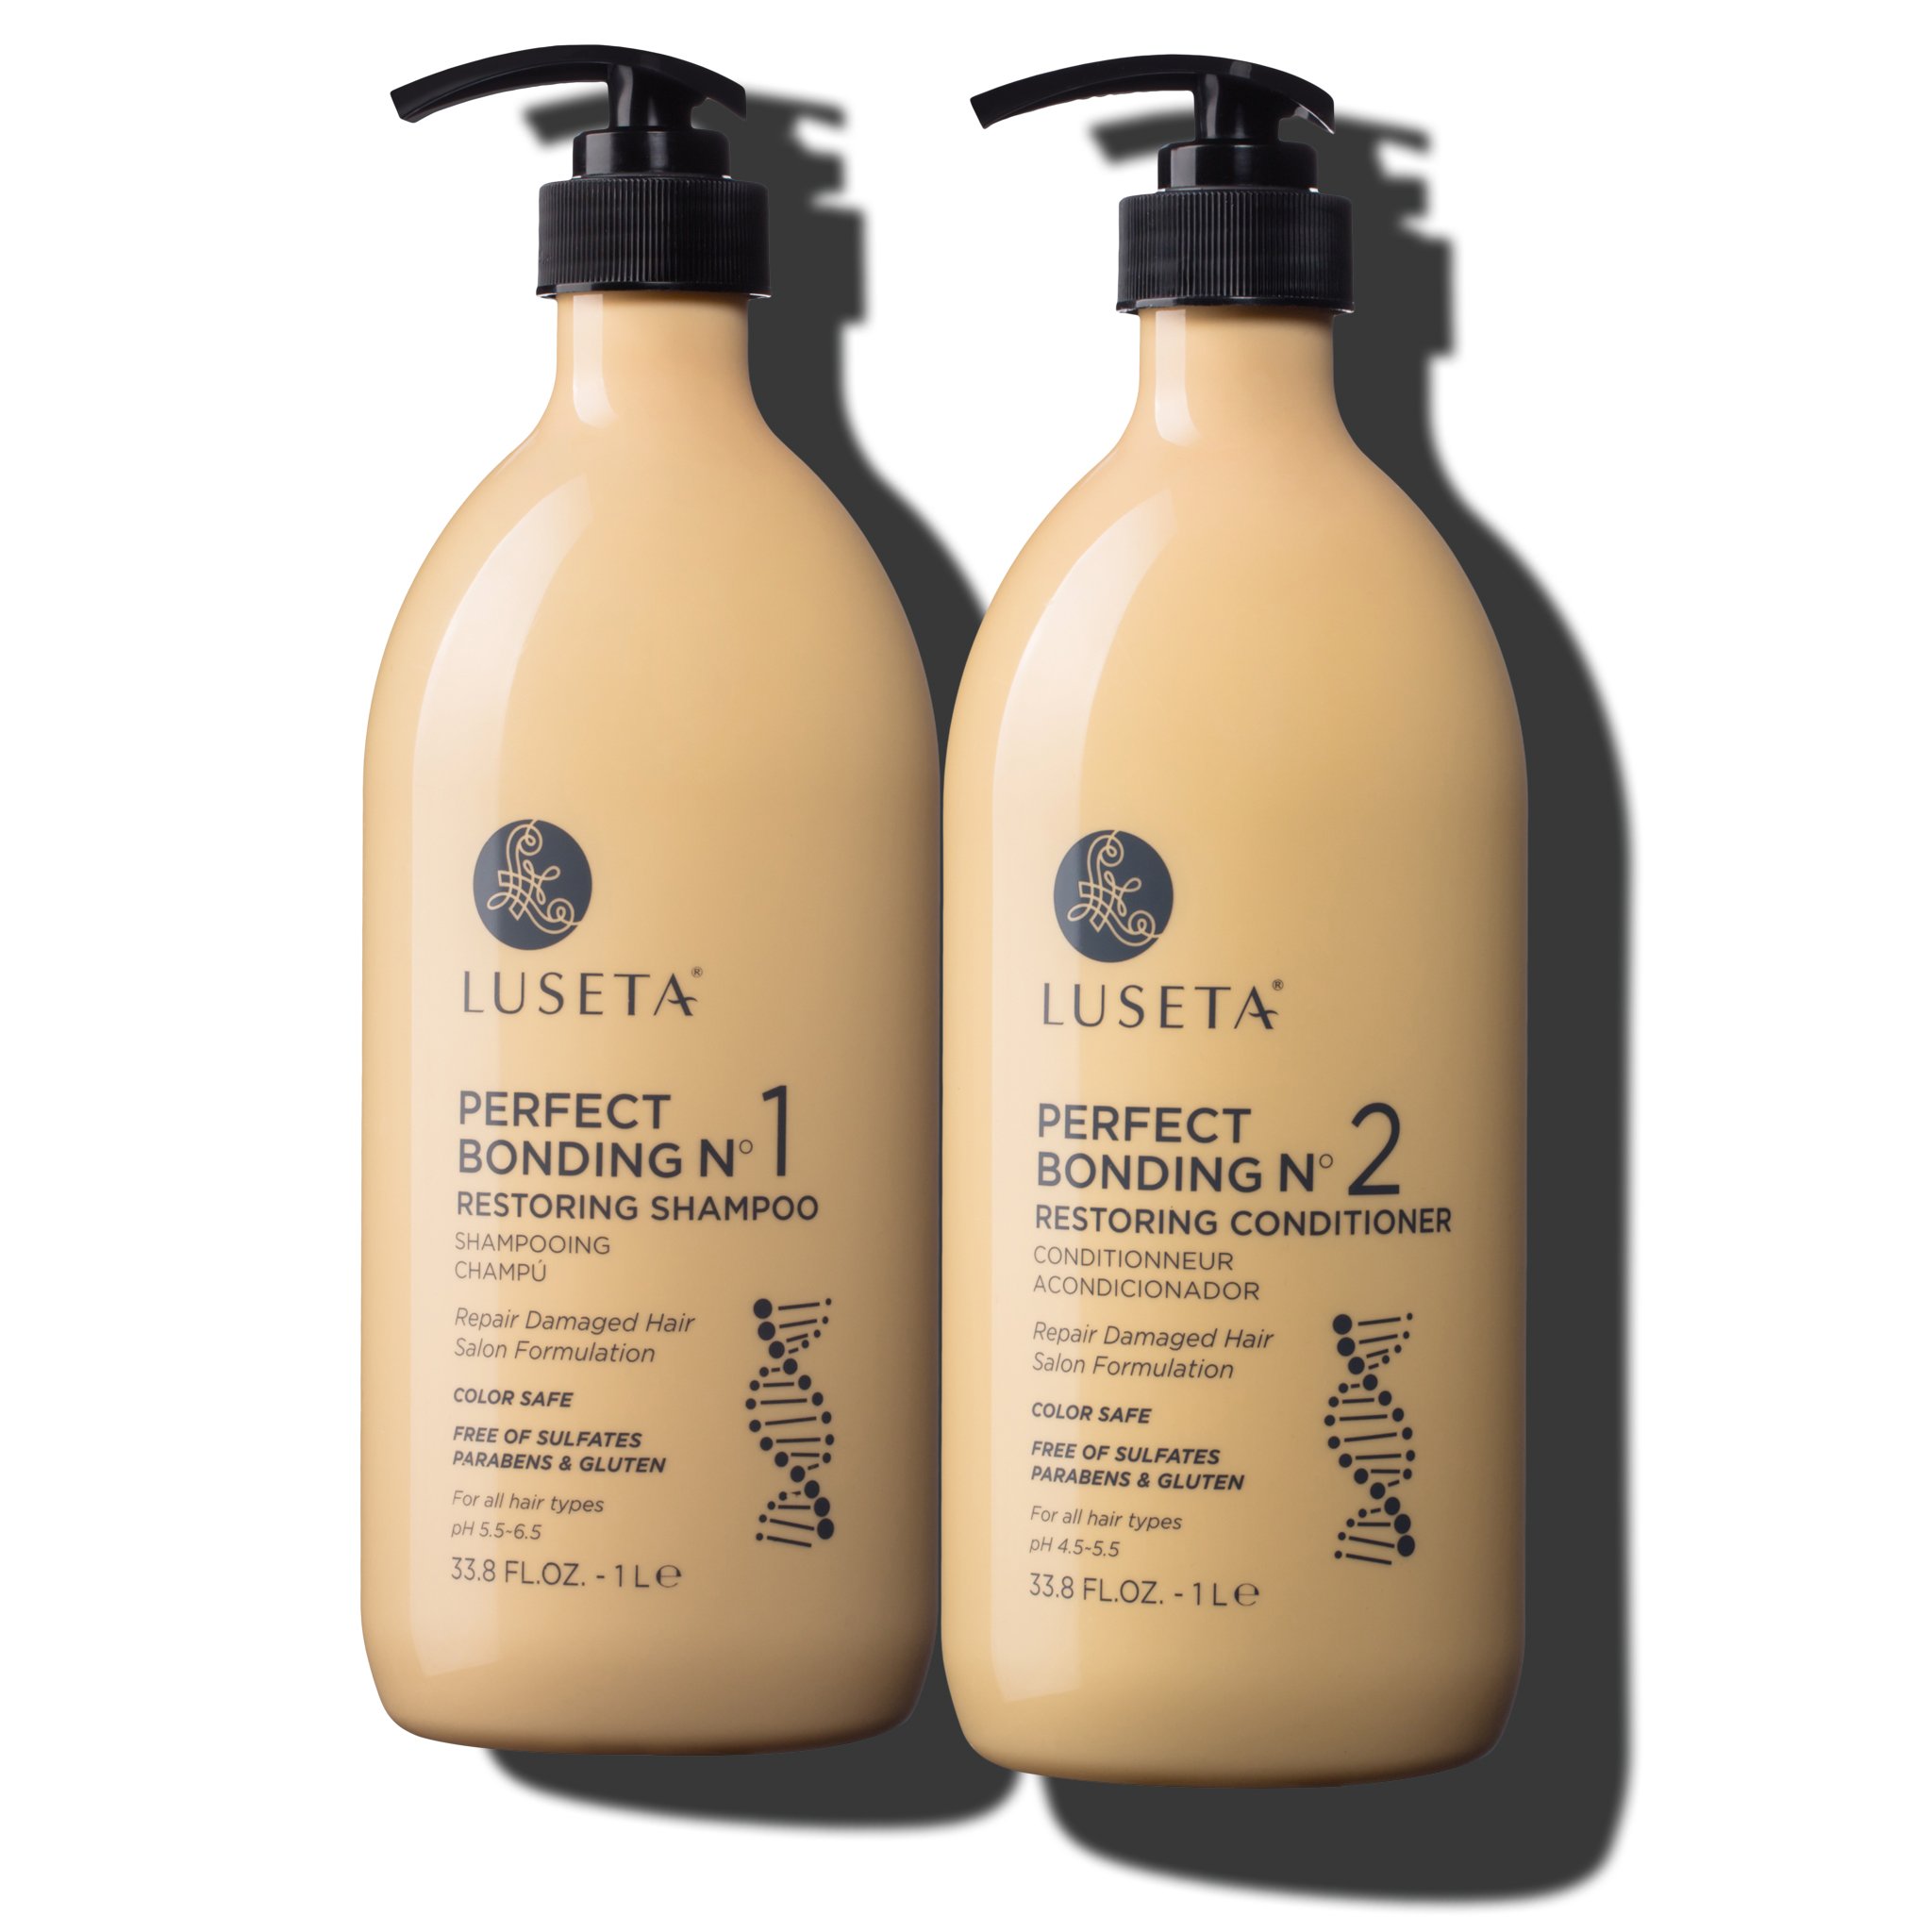 Luseta Perfect Bonding Hair Damage Repair Shampoo &amp; Conditioner Set for All Hair Types - Sulfate Free Paraben Free Color Safe Salon Formulation - image 1 of 6